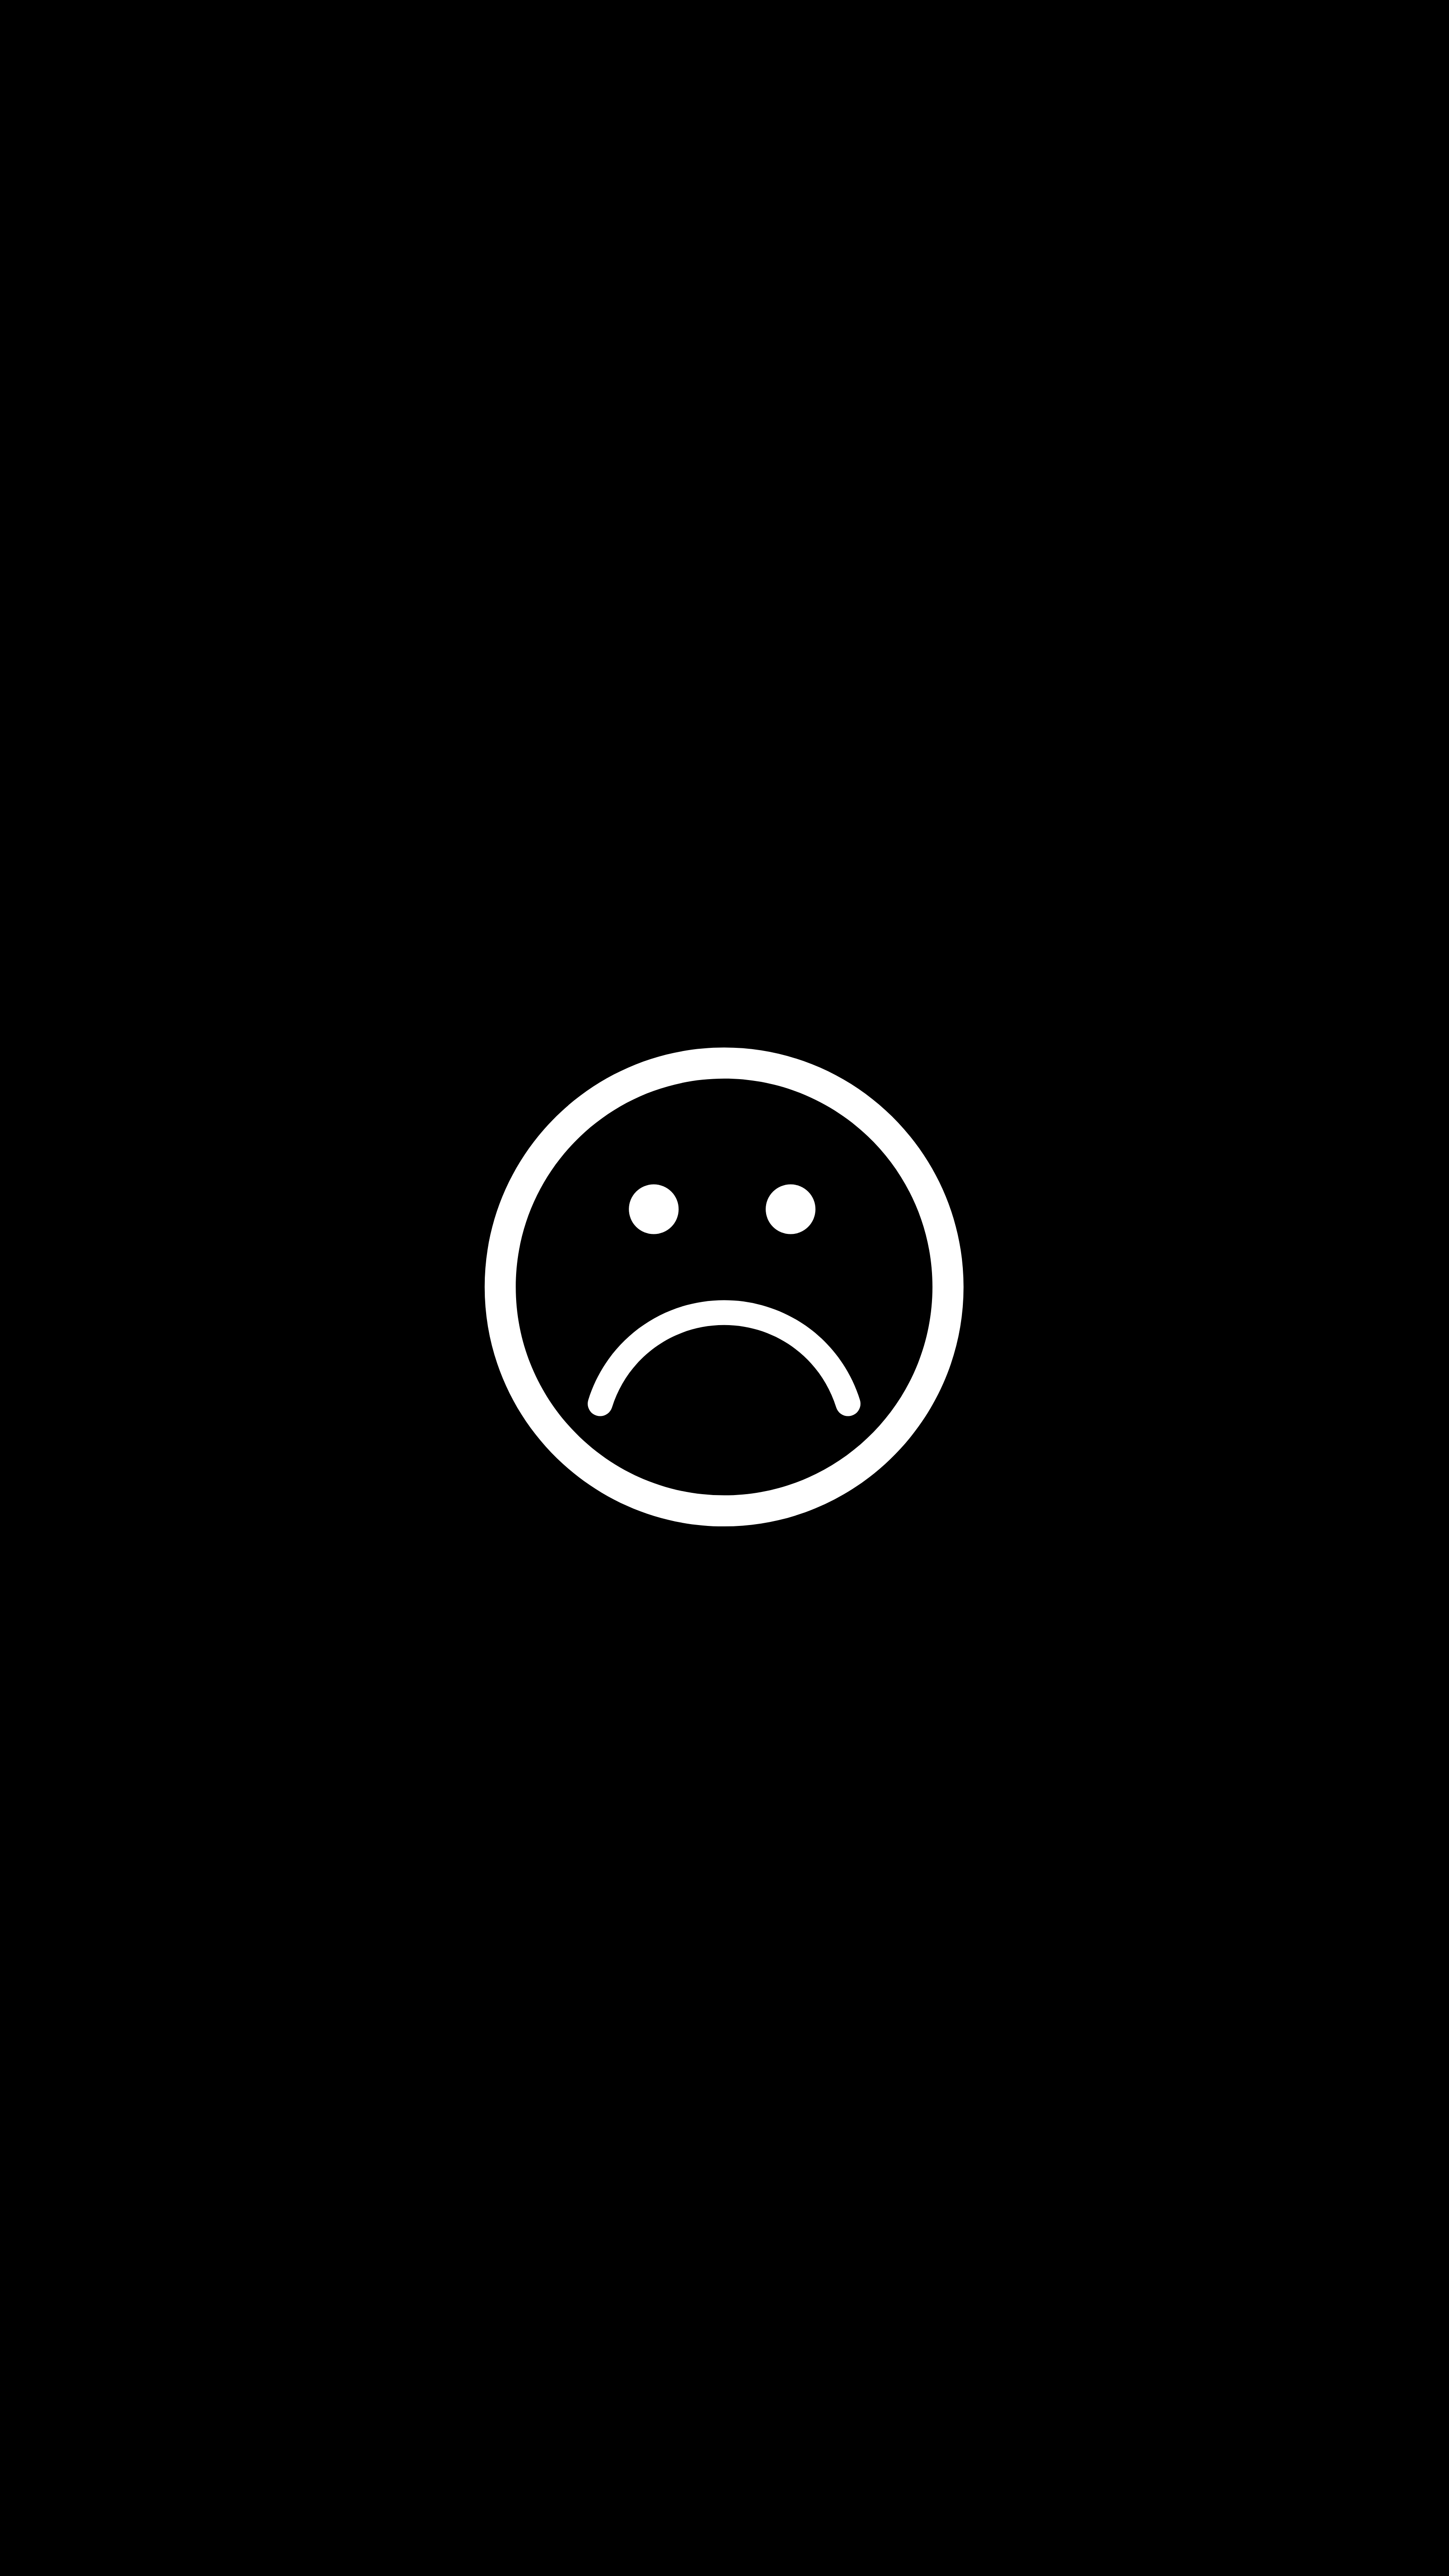 62040 Screensavers and Wallpapers Smiley for phone. Download vector, smile, bw, chb, sad, emoticon, smiley pictures for free